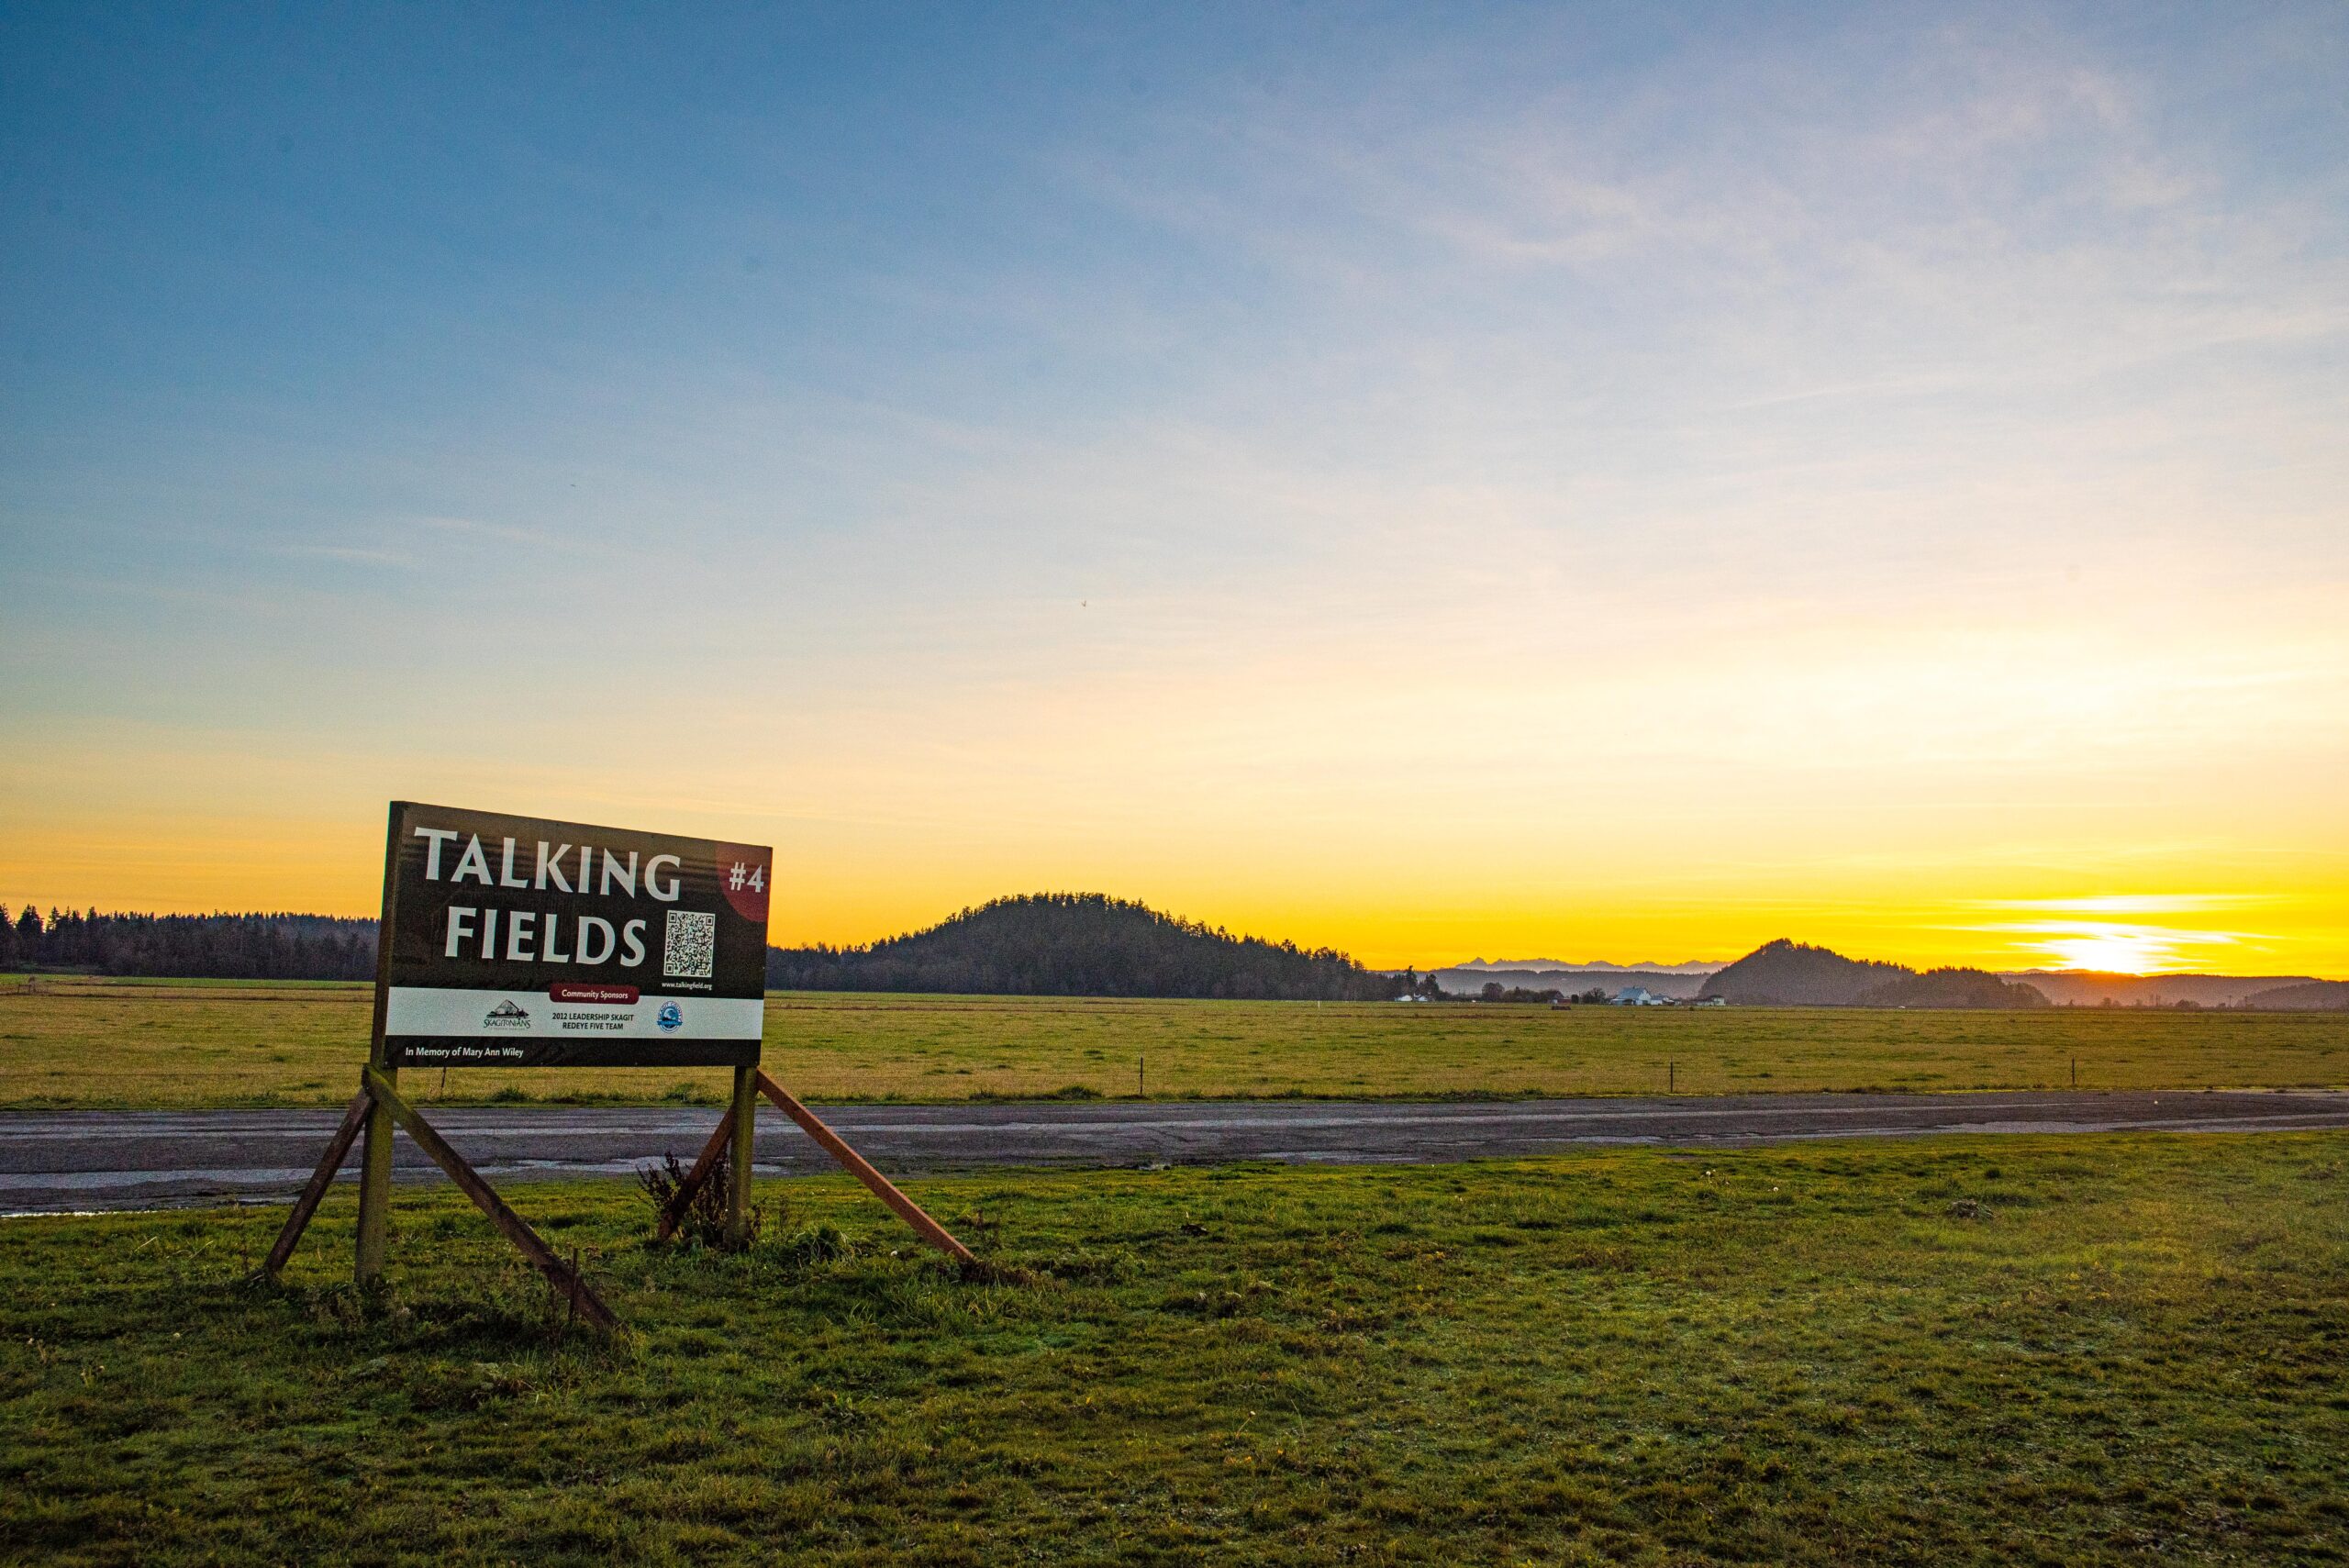 The Talking Fields program is a self-guided, driving tour throughout the Skagit Delta, launched by Skagitonians to Preserve Farmland.